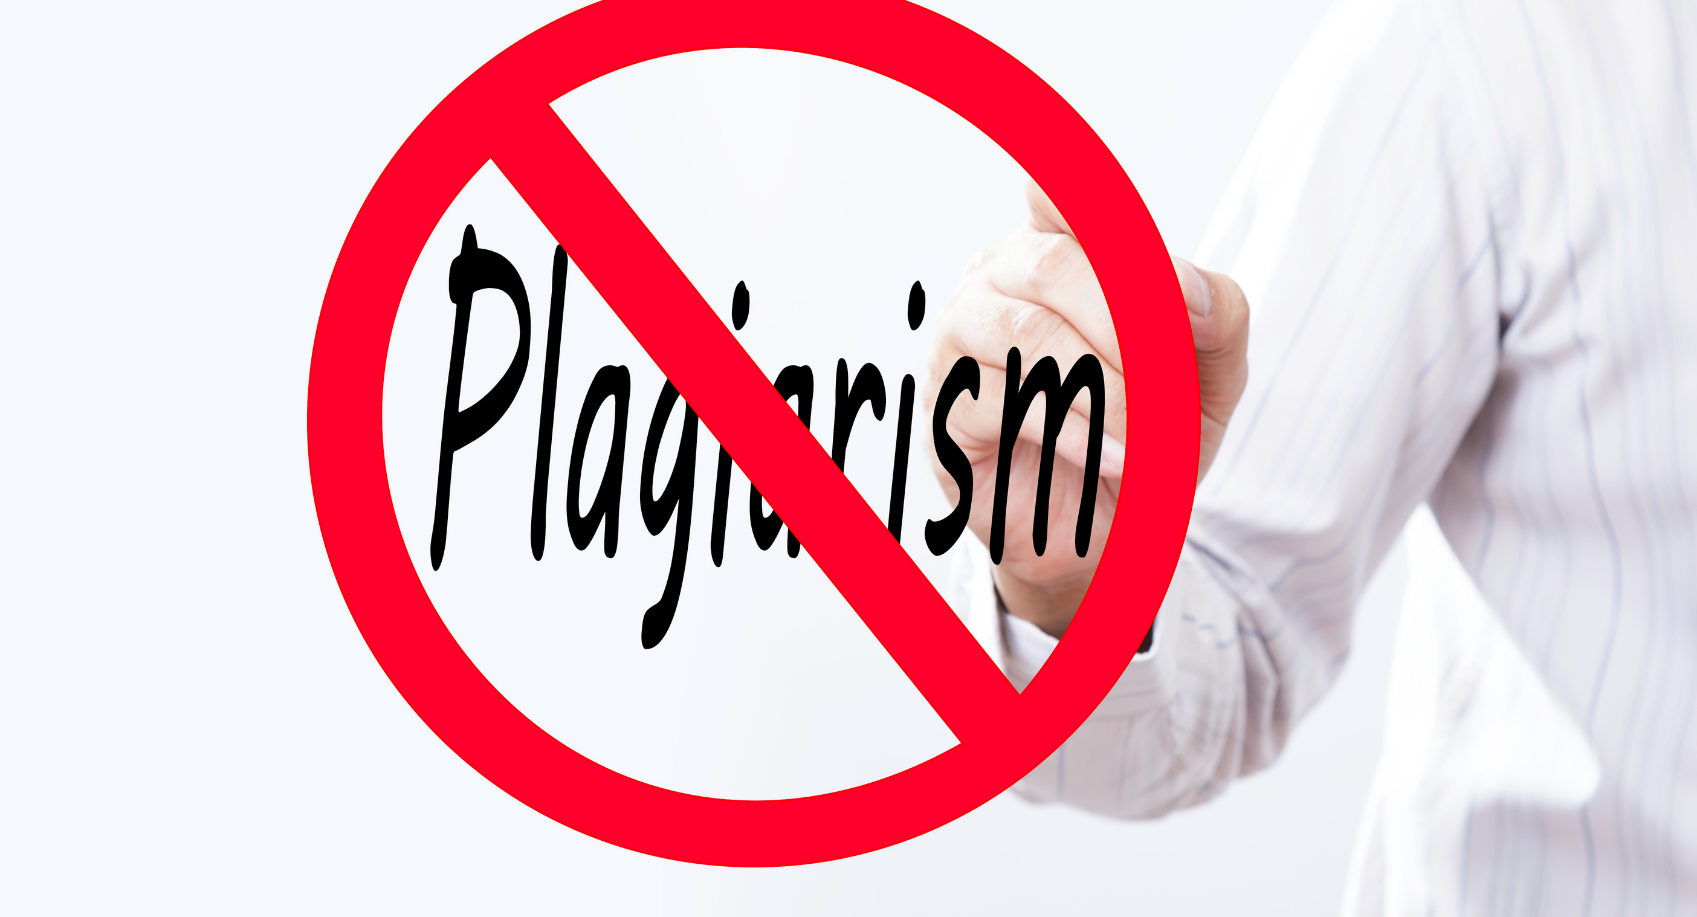 15 best Plagiarism Checkers